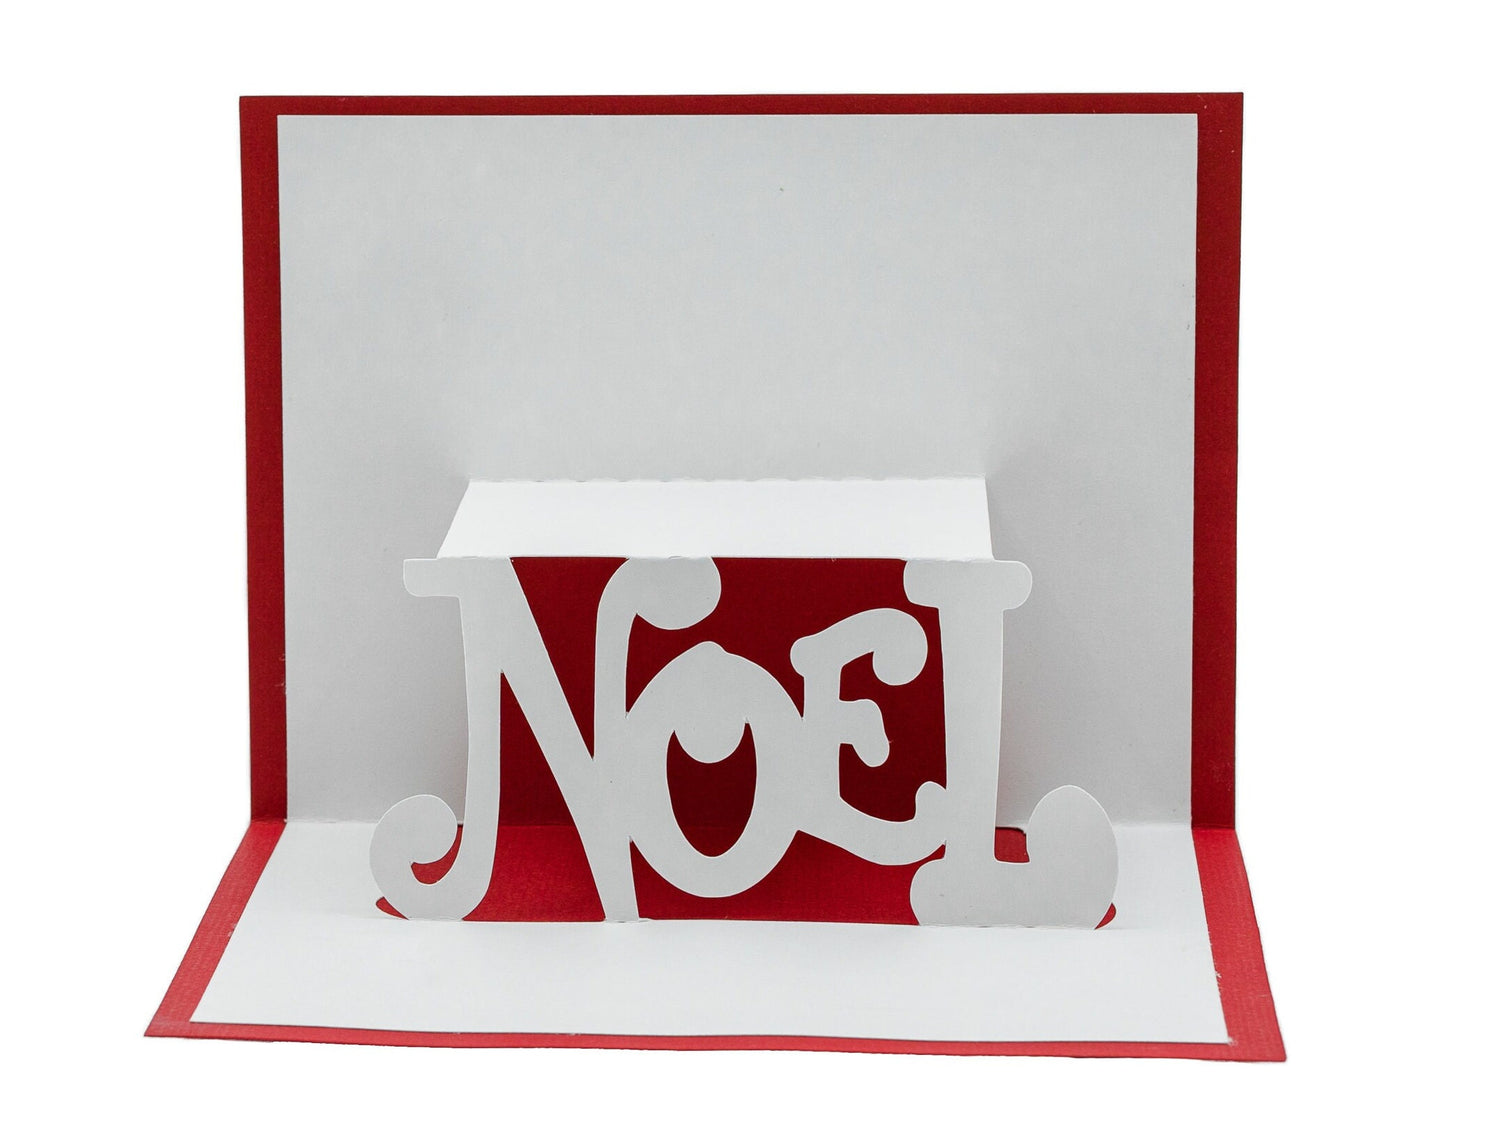 Noel Minimalist Christmas Pop Up 3D Greeting Card | Modern Style Holiday Card | Unique Holiday Decorations | Handmade Christmas Gift